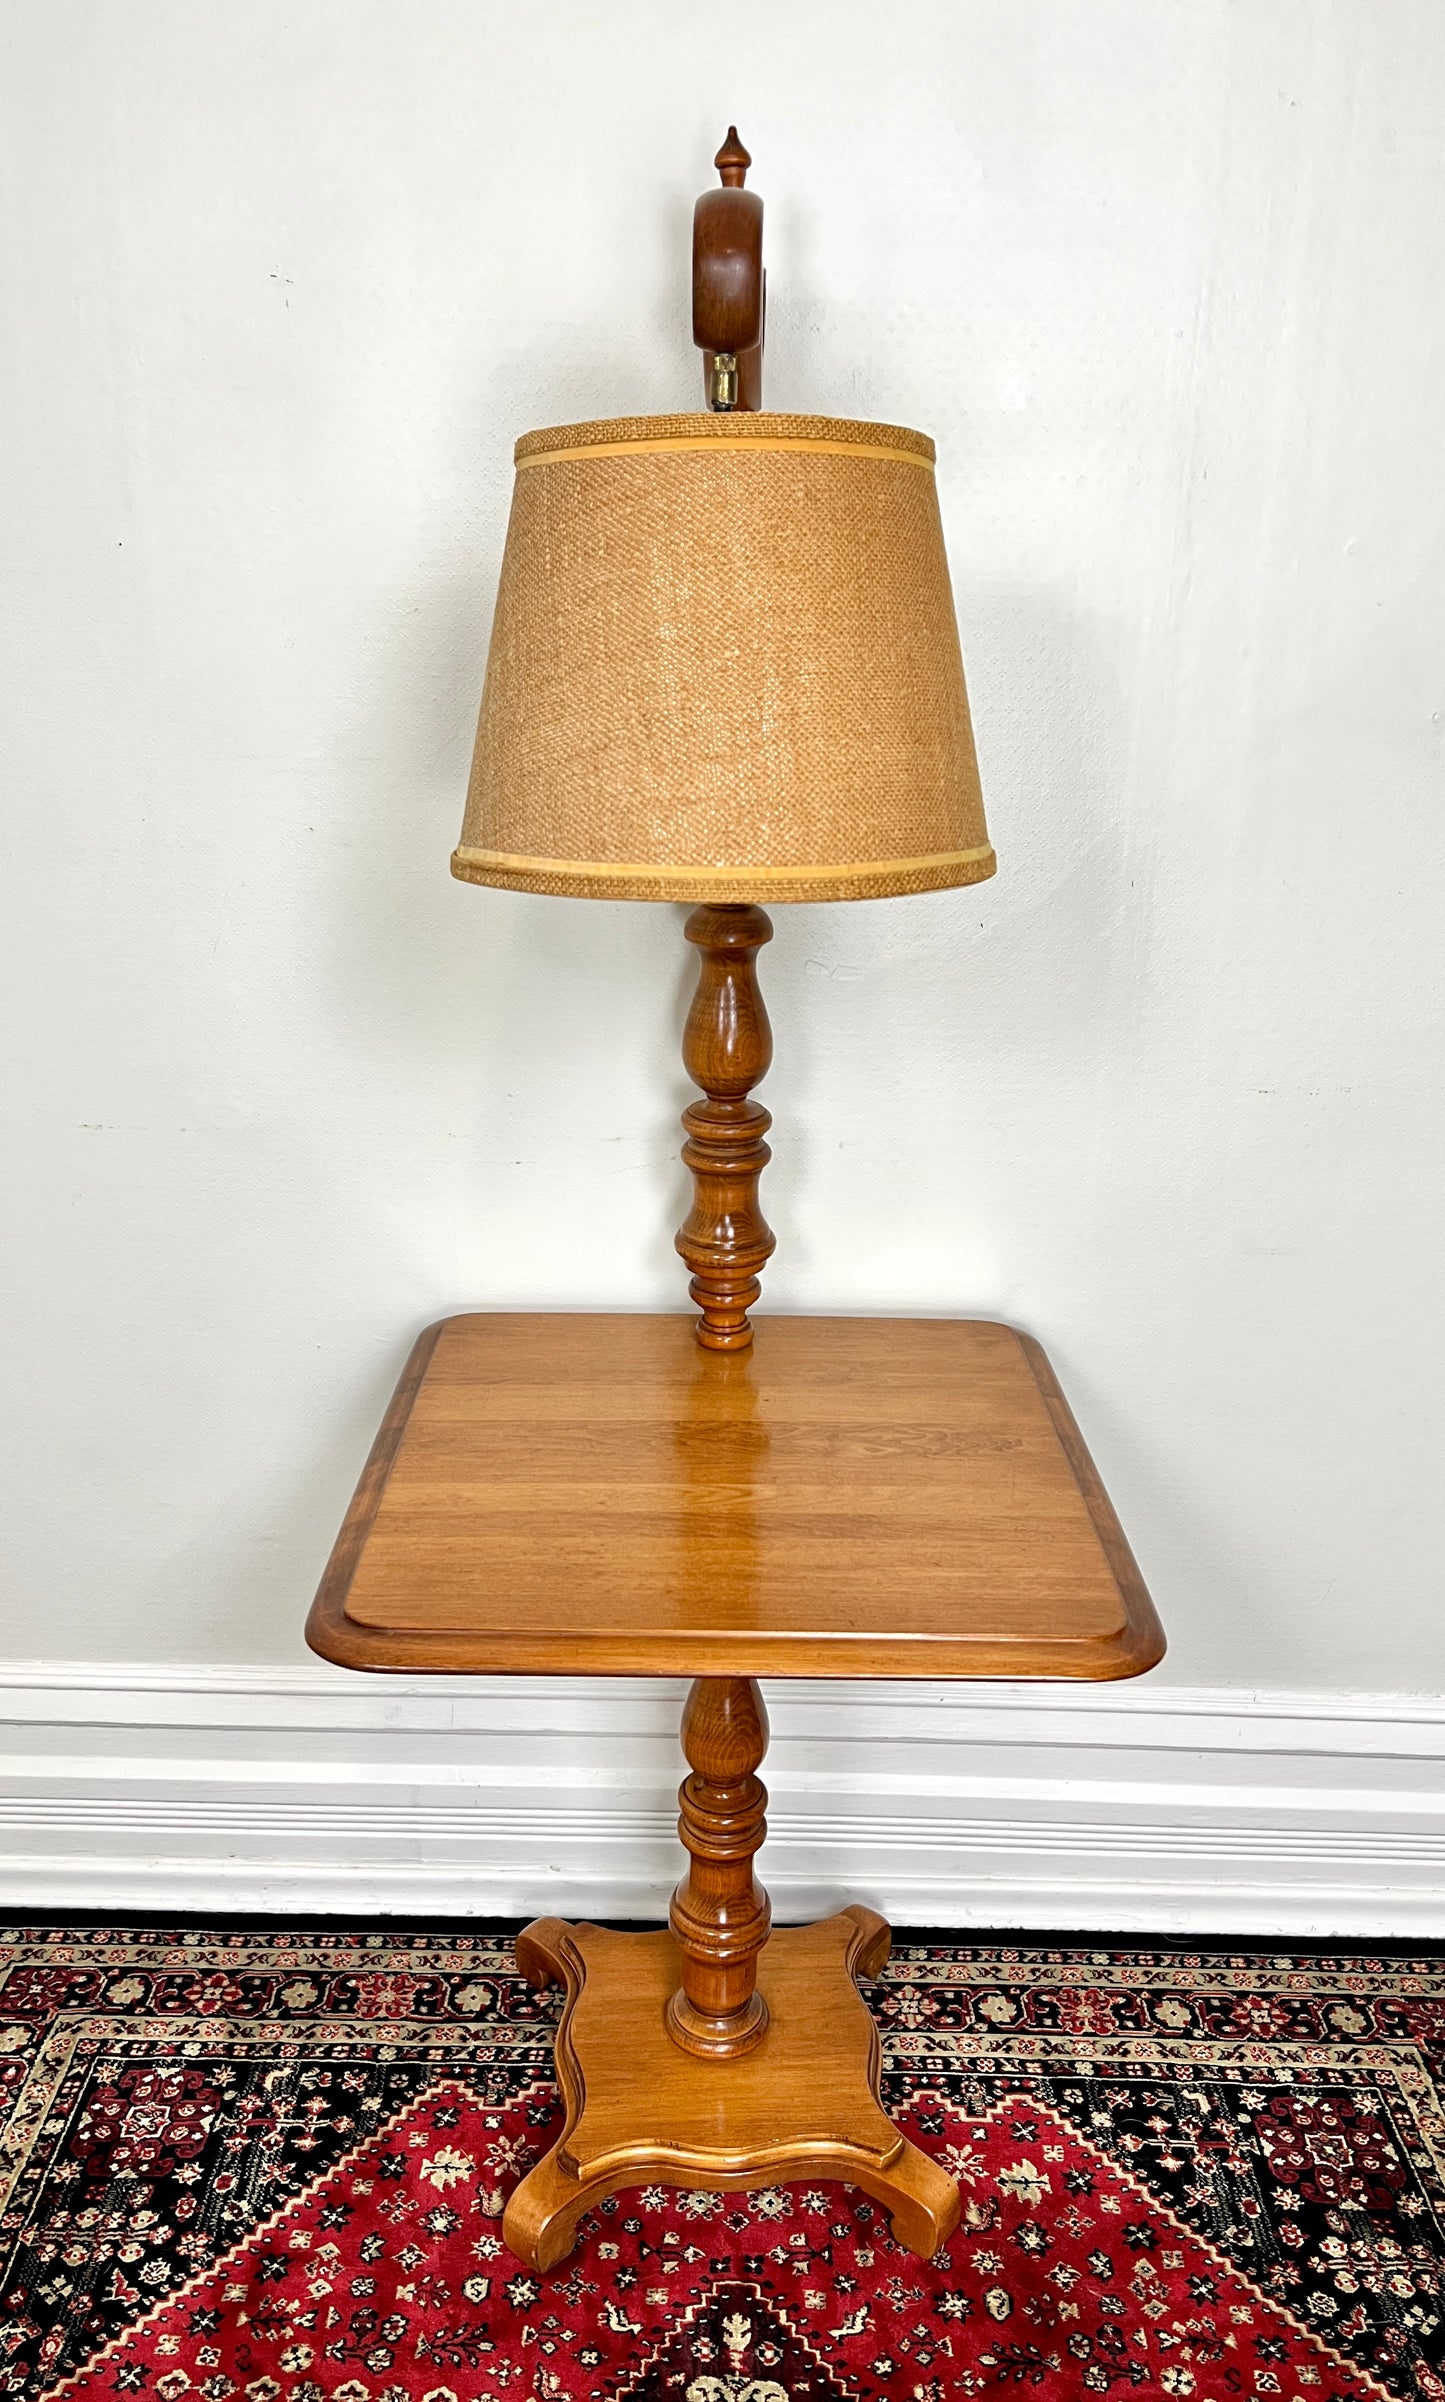 The Stanley Lamp Table